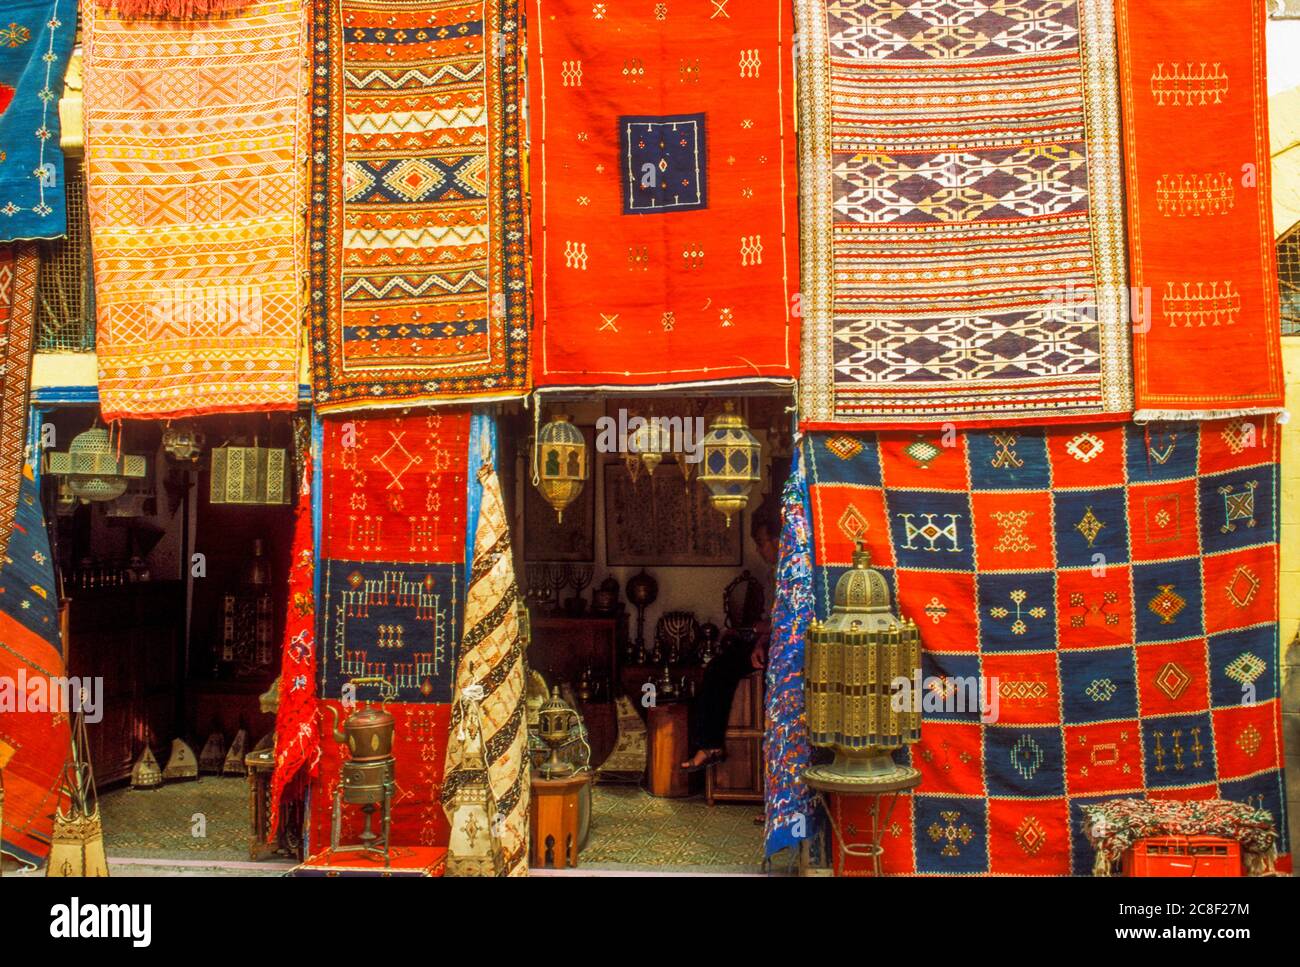 Rugs and artefacts for sale in Meknes, Morocco Stock Photo